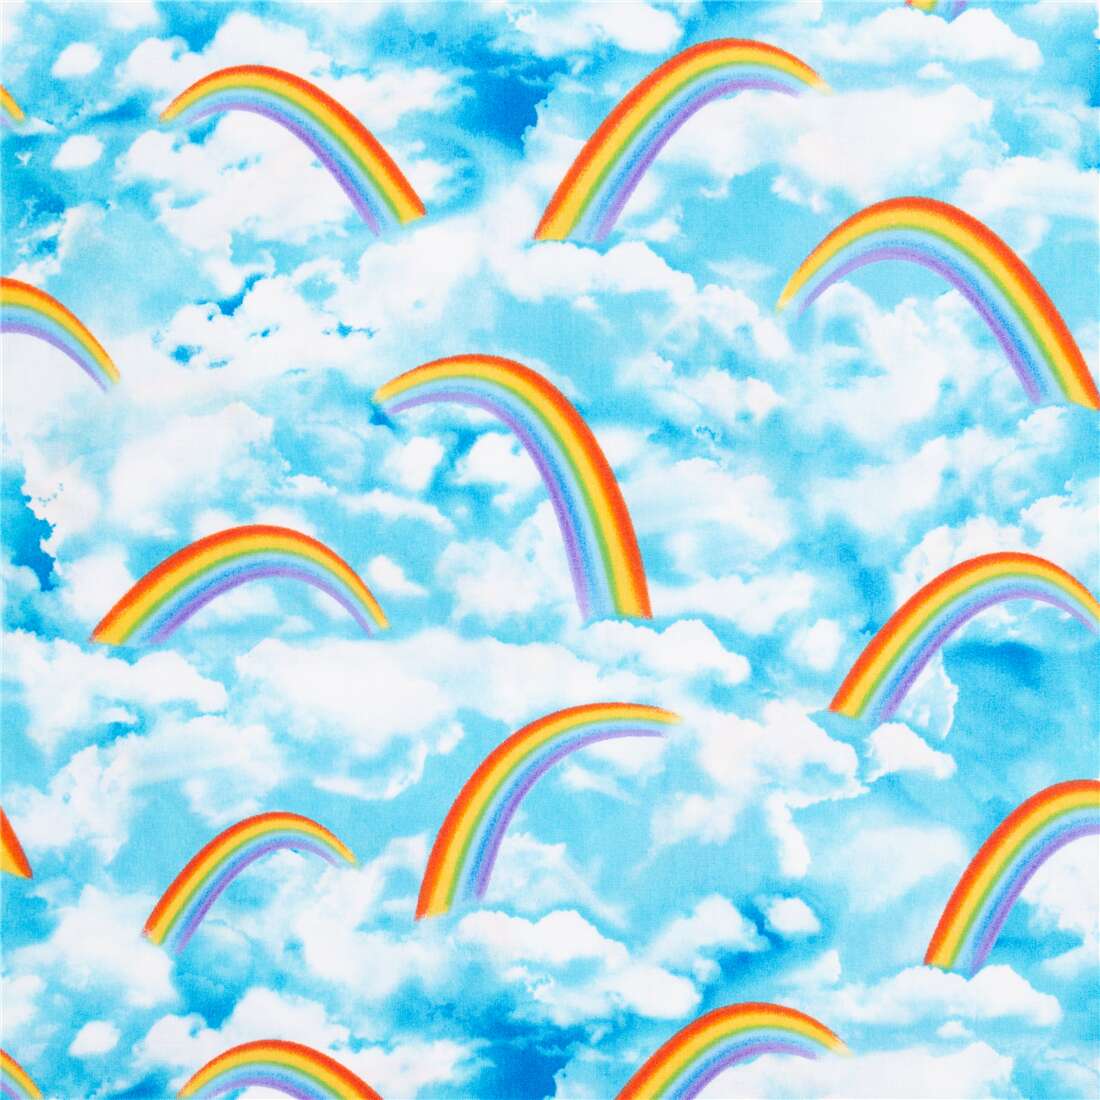 Landscape Medley Beautiful Blue Sky Clouds and Rainbows Cotton Fabric